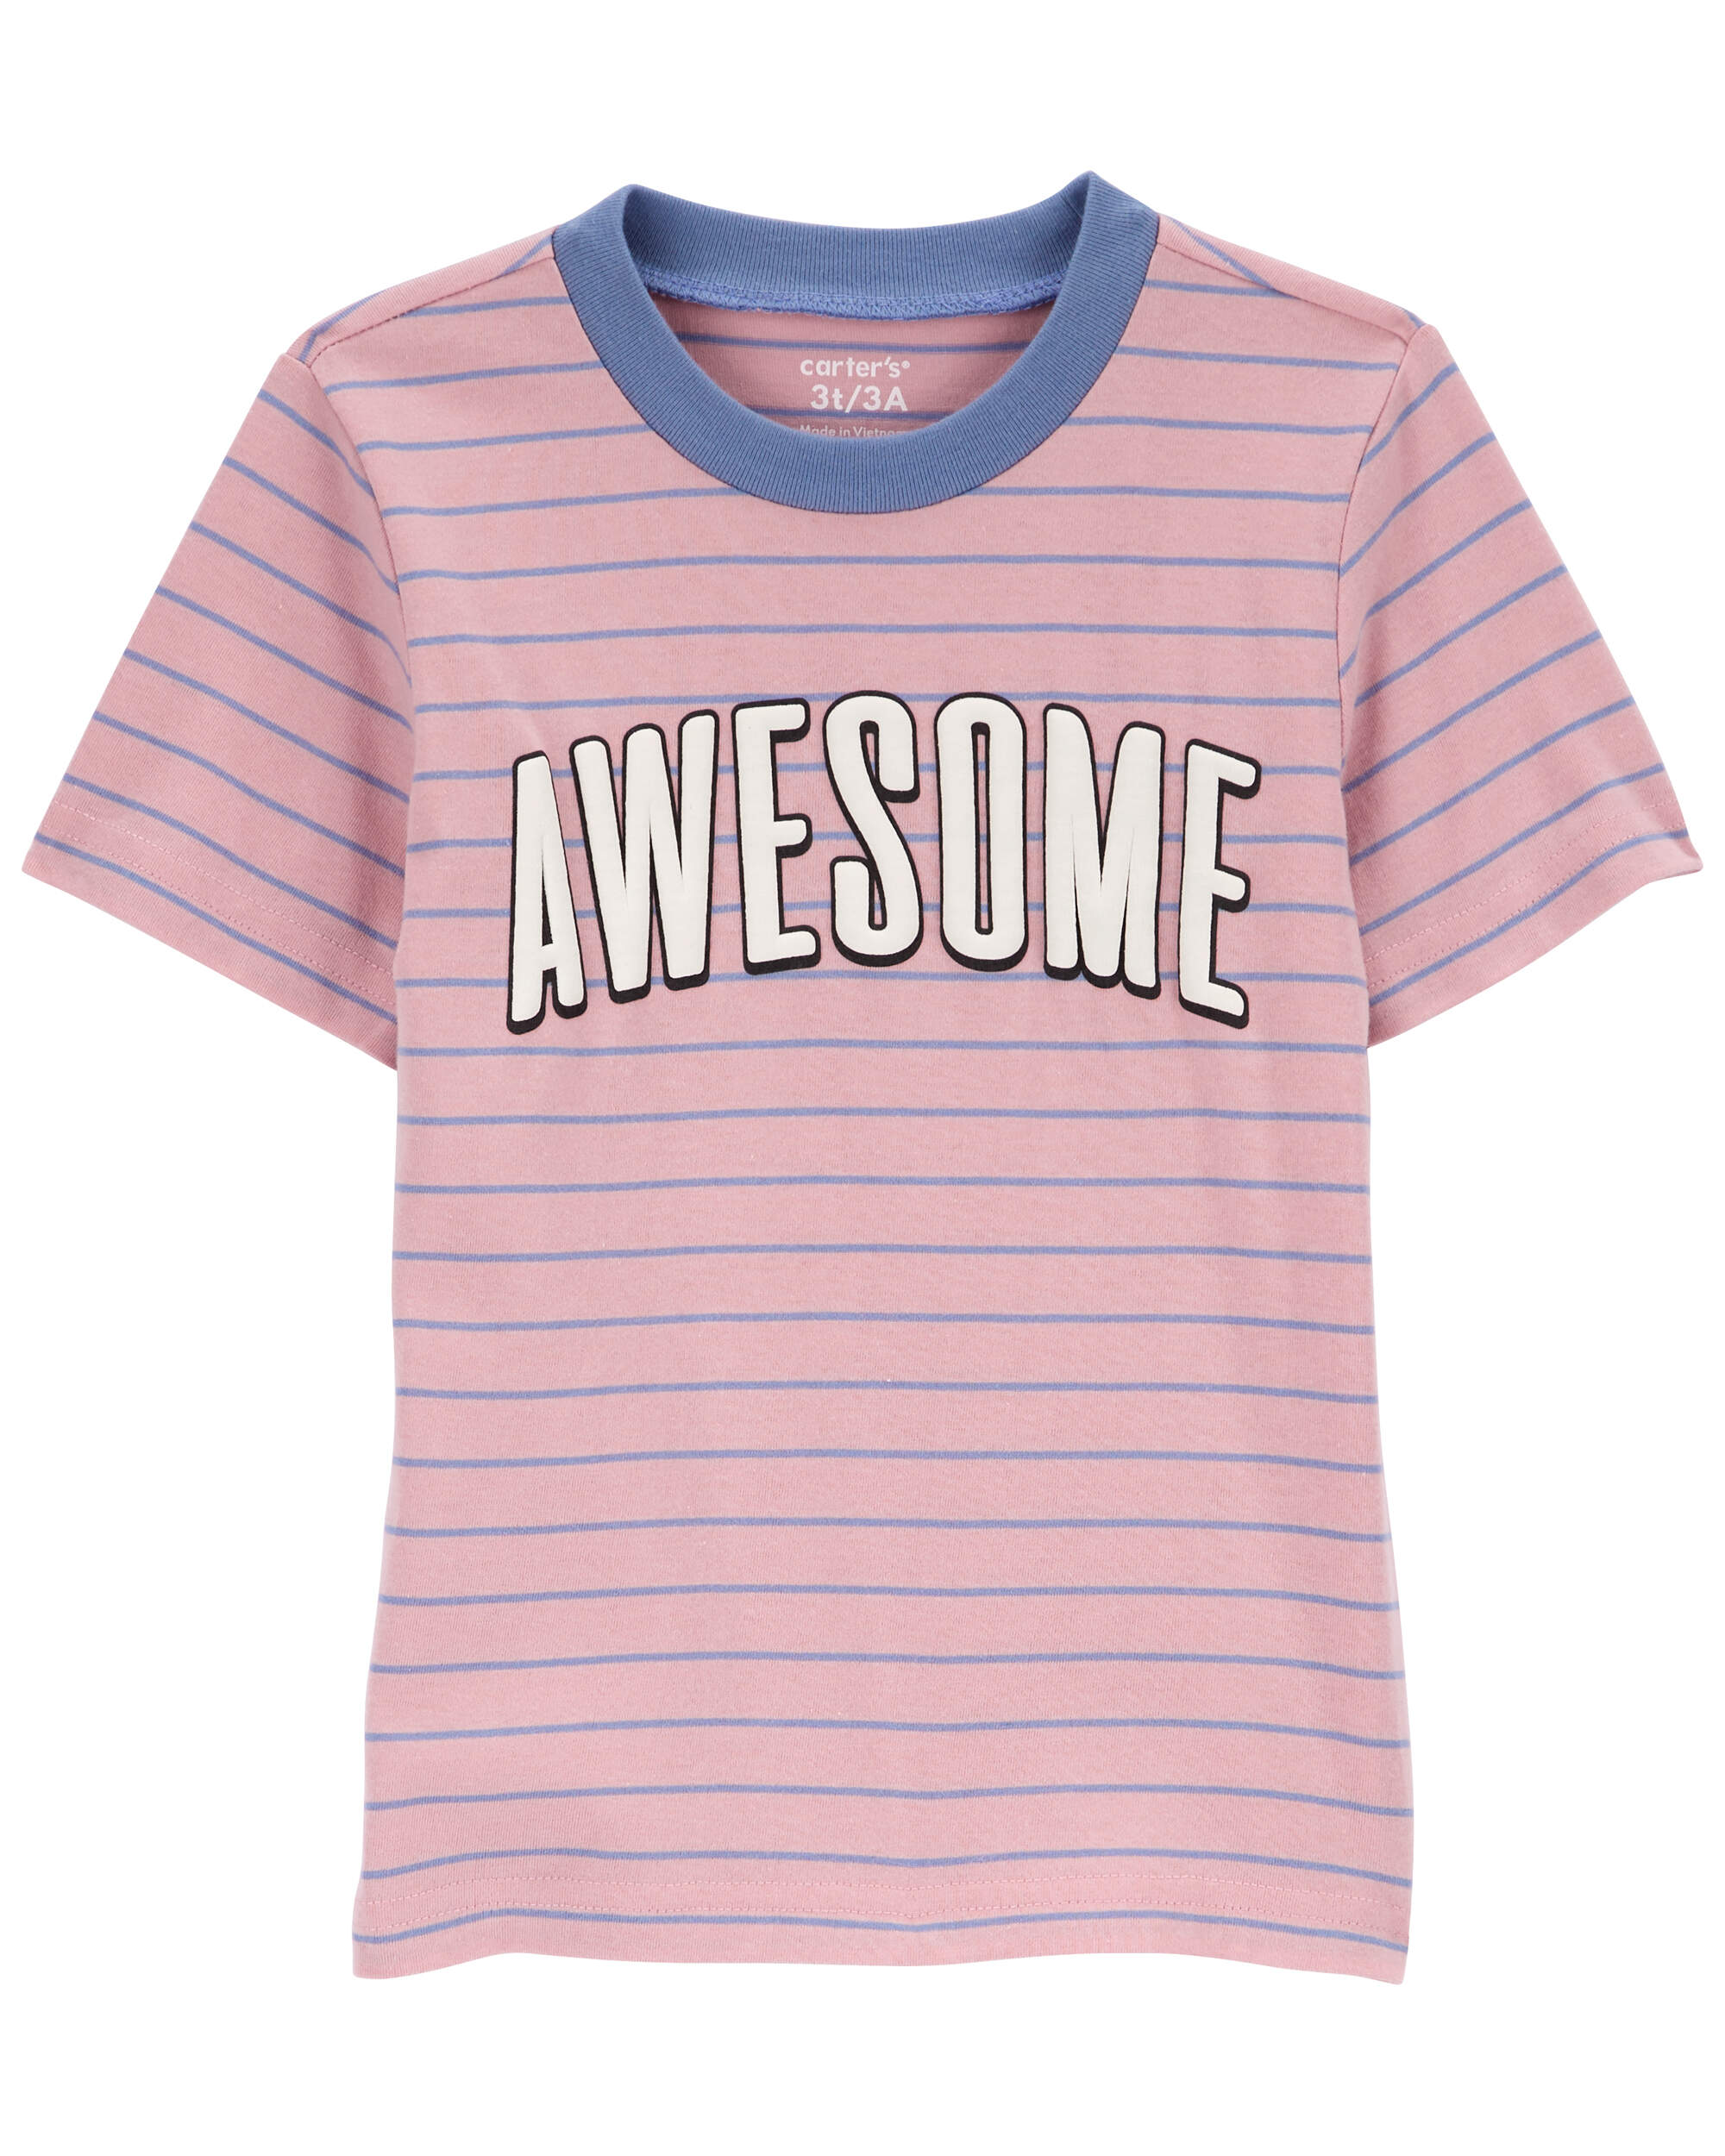 Toddler Awesome Striped Graphic Tee